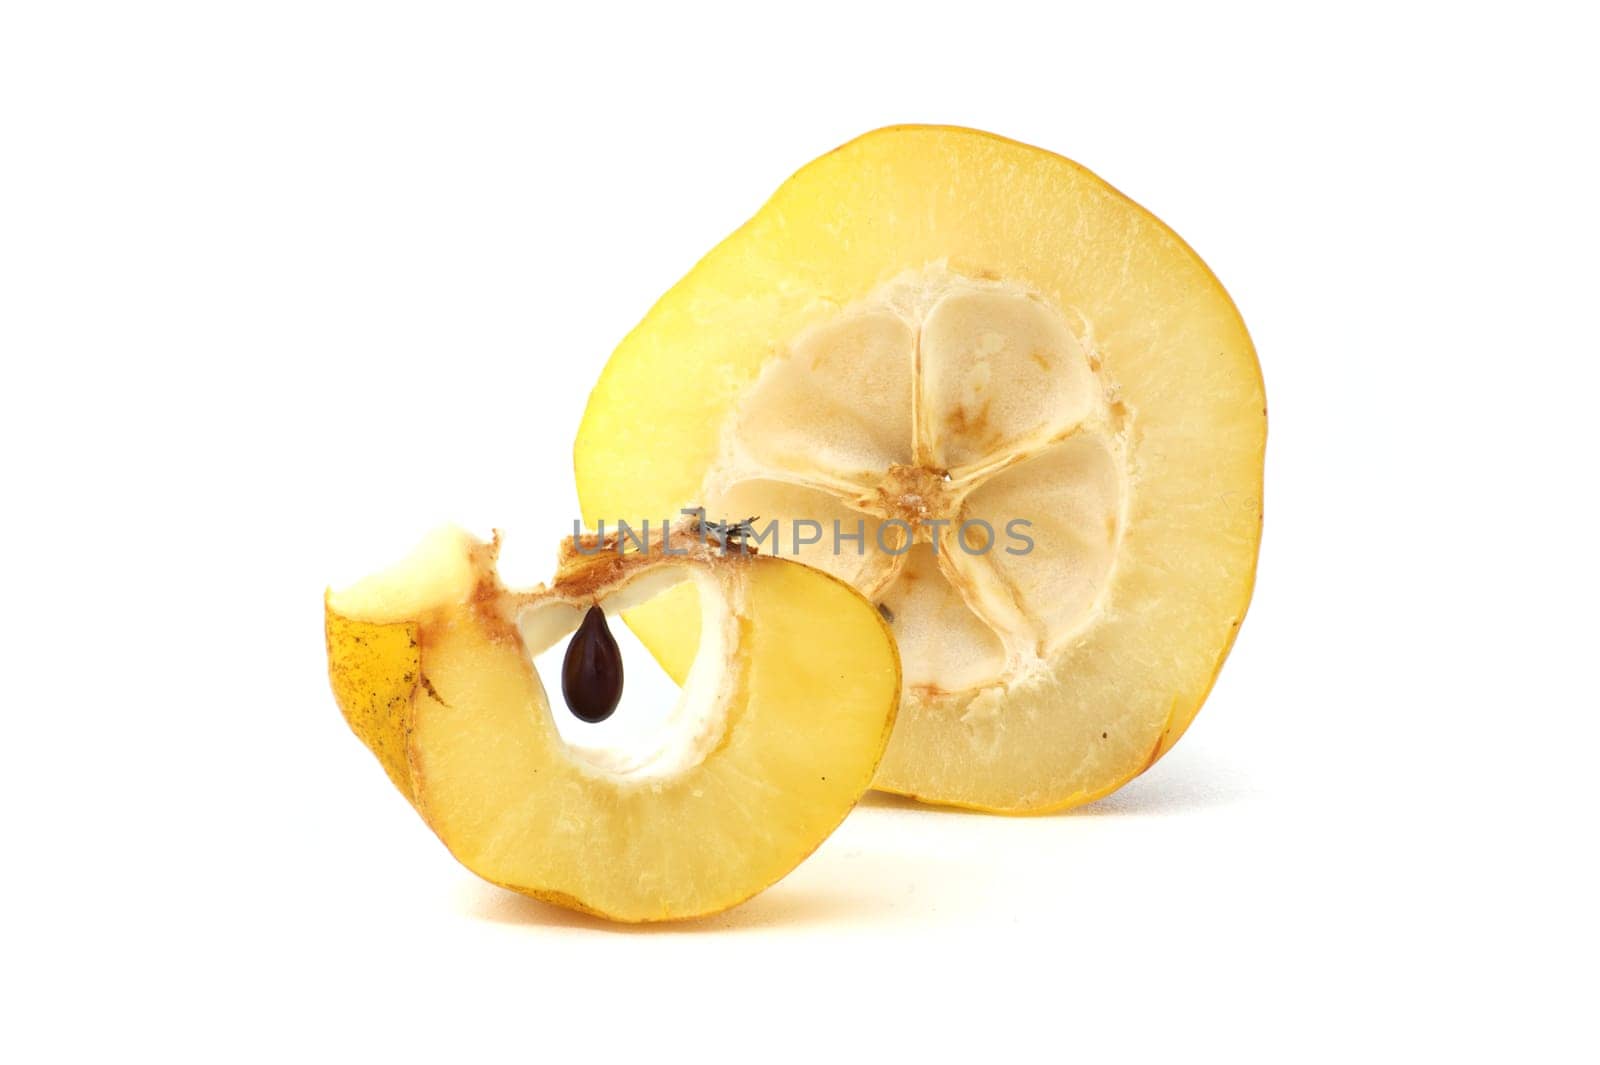 Yellow quince fruits whole and some cut in half to expose their seeds isolated on white background, full depth of field, Chaenomeles japonica or Japanese quince